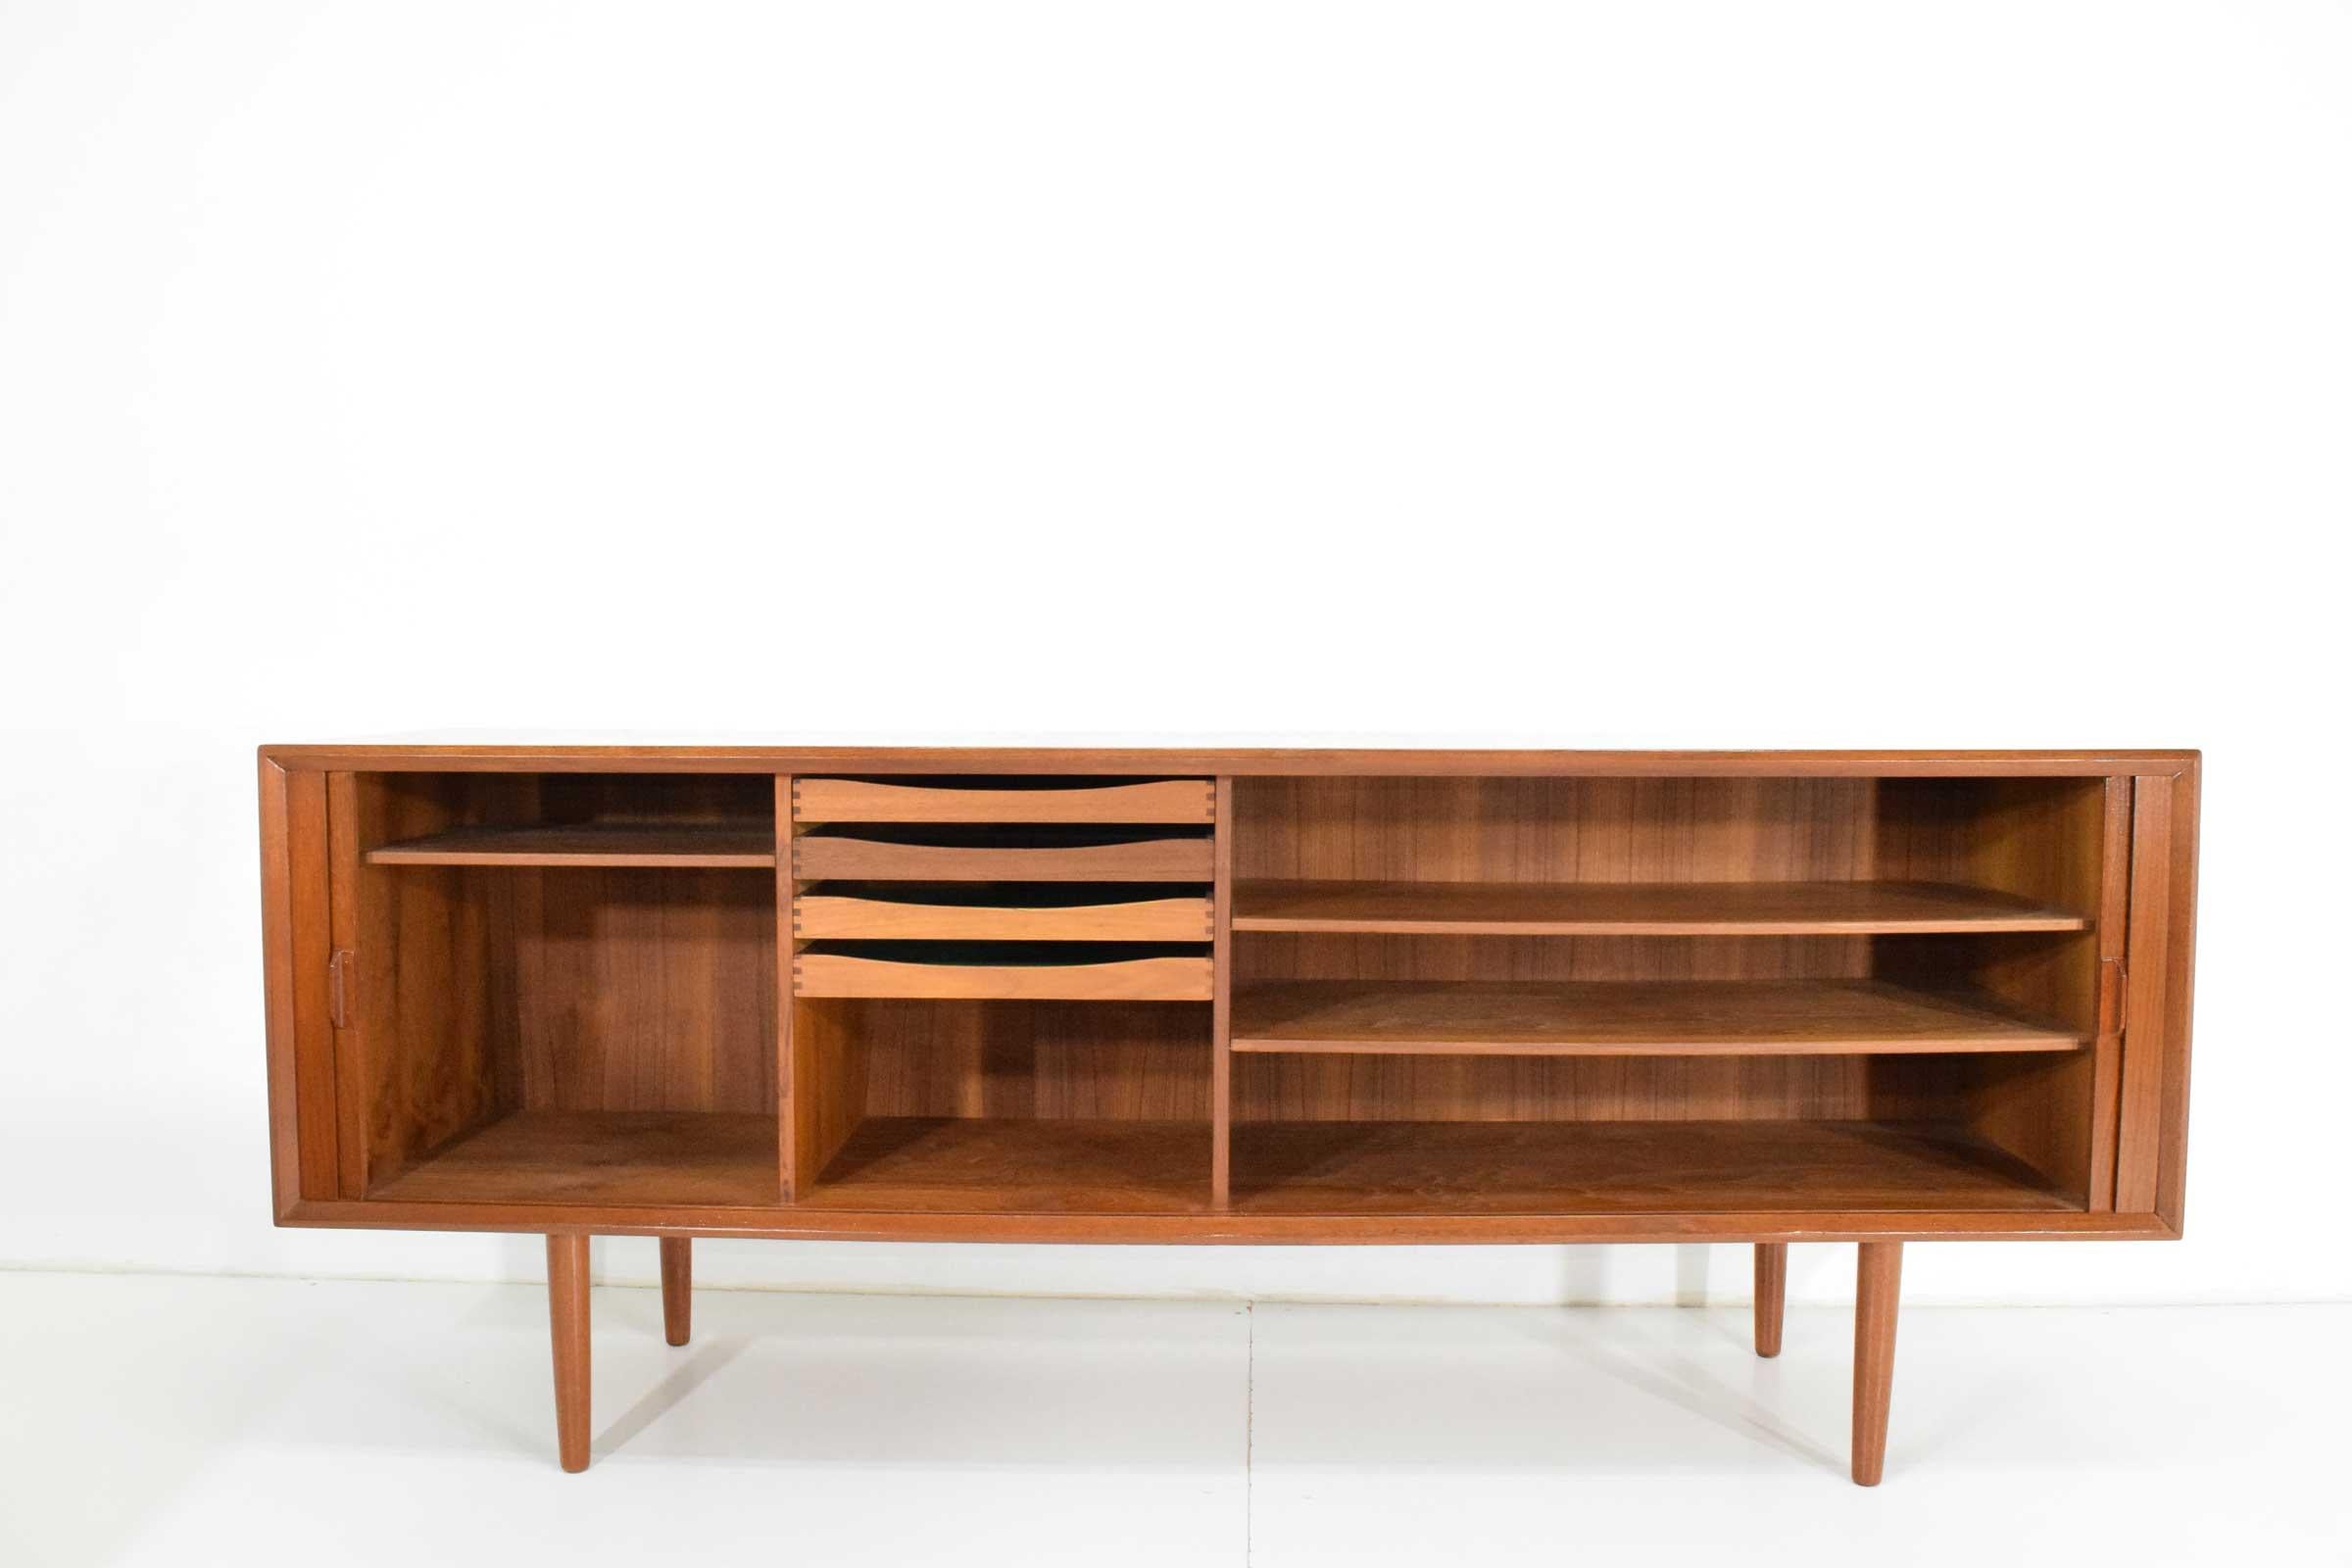 Mid-Century Modern. Beautiful teak wood with lots of shelving and storage. Tambour doors recess so not to worry about doors getting in the way. This sideboard/credenza has been restored beautifully so it is like new but has the aged quality teak